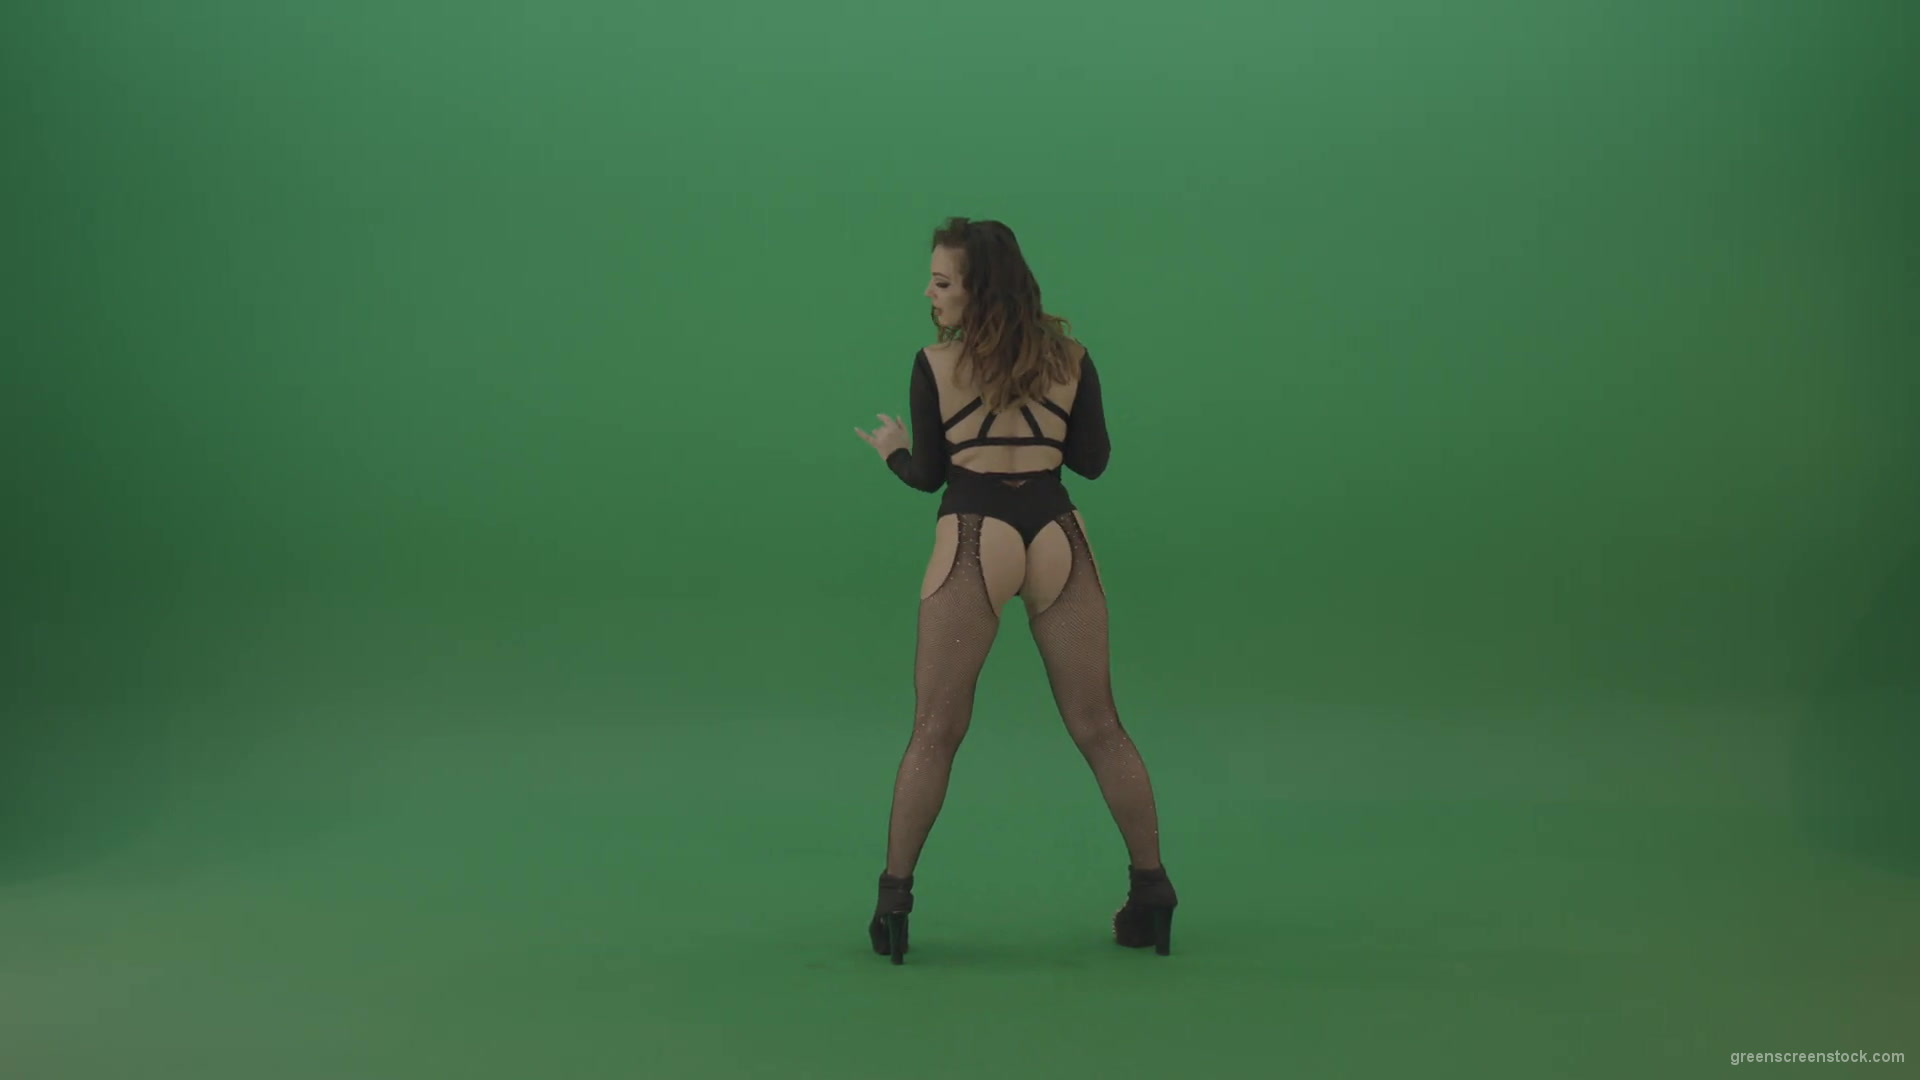 Beauty-girl-funny-shaking-the-ass-and-dancing-isolated-on-green-screen-1920_002 Green Screen Stock